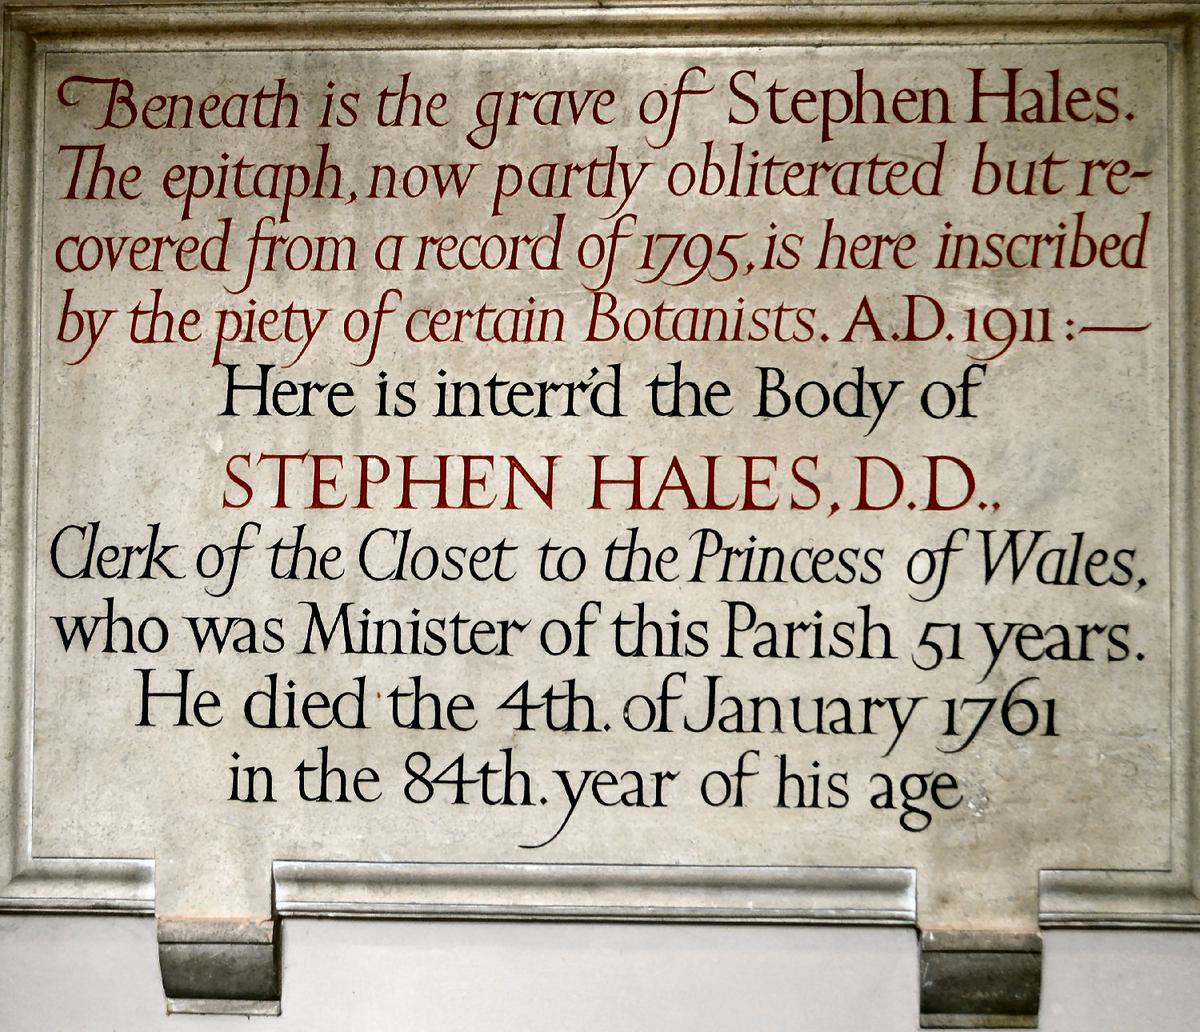 Monument for scientist and clergyman Stephen Hales at St Mary's church, Teddington. (<a href="https://commons.wikimedia.org/w/index.php?title=User:AndyScott&action=edit&redlink=1">AndyScott</a>/<a href="https://creativecommons.org/licenses/by/4.0/deed.en">CC BY-SA 4.0</a>)